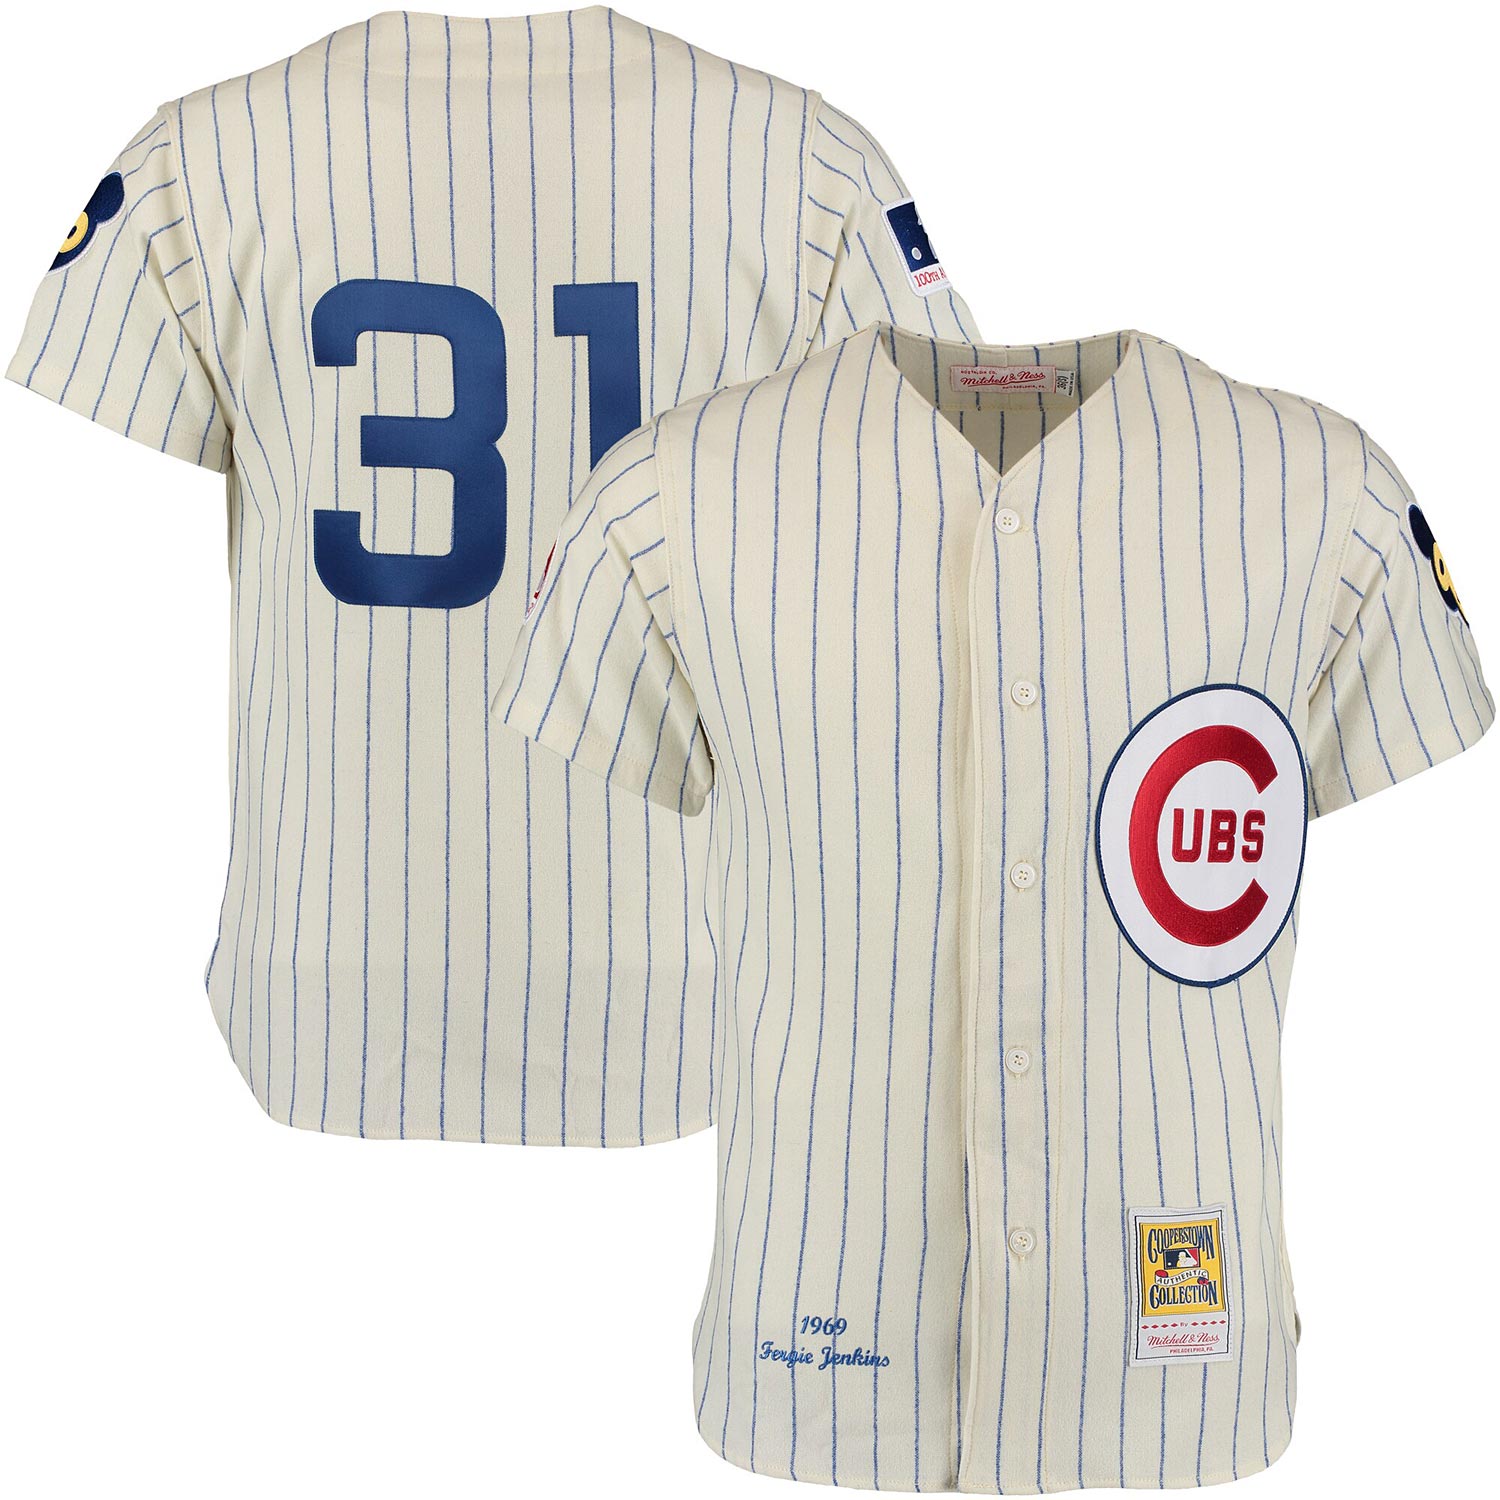 MLB Chicago Cubs (Andre Dawson) Men's Cooperstown Baseball Jersey.